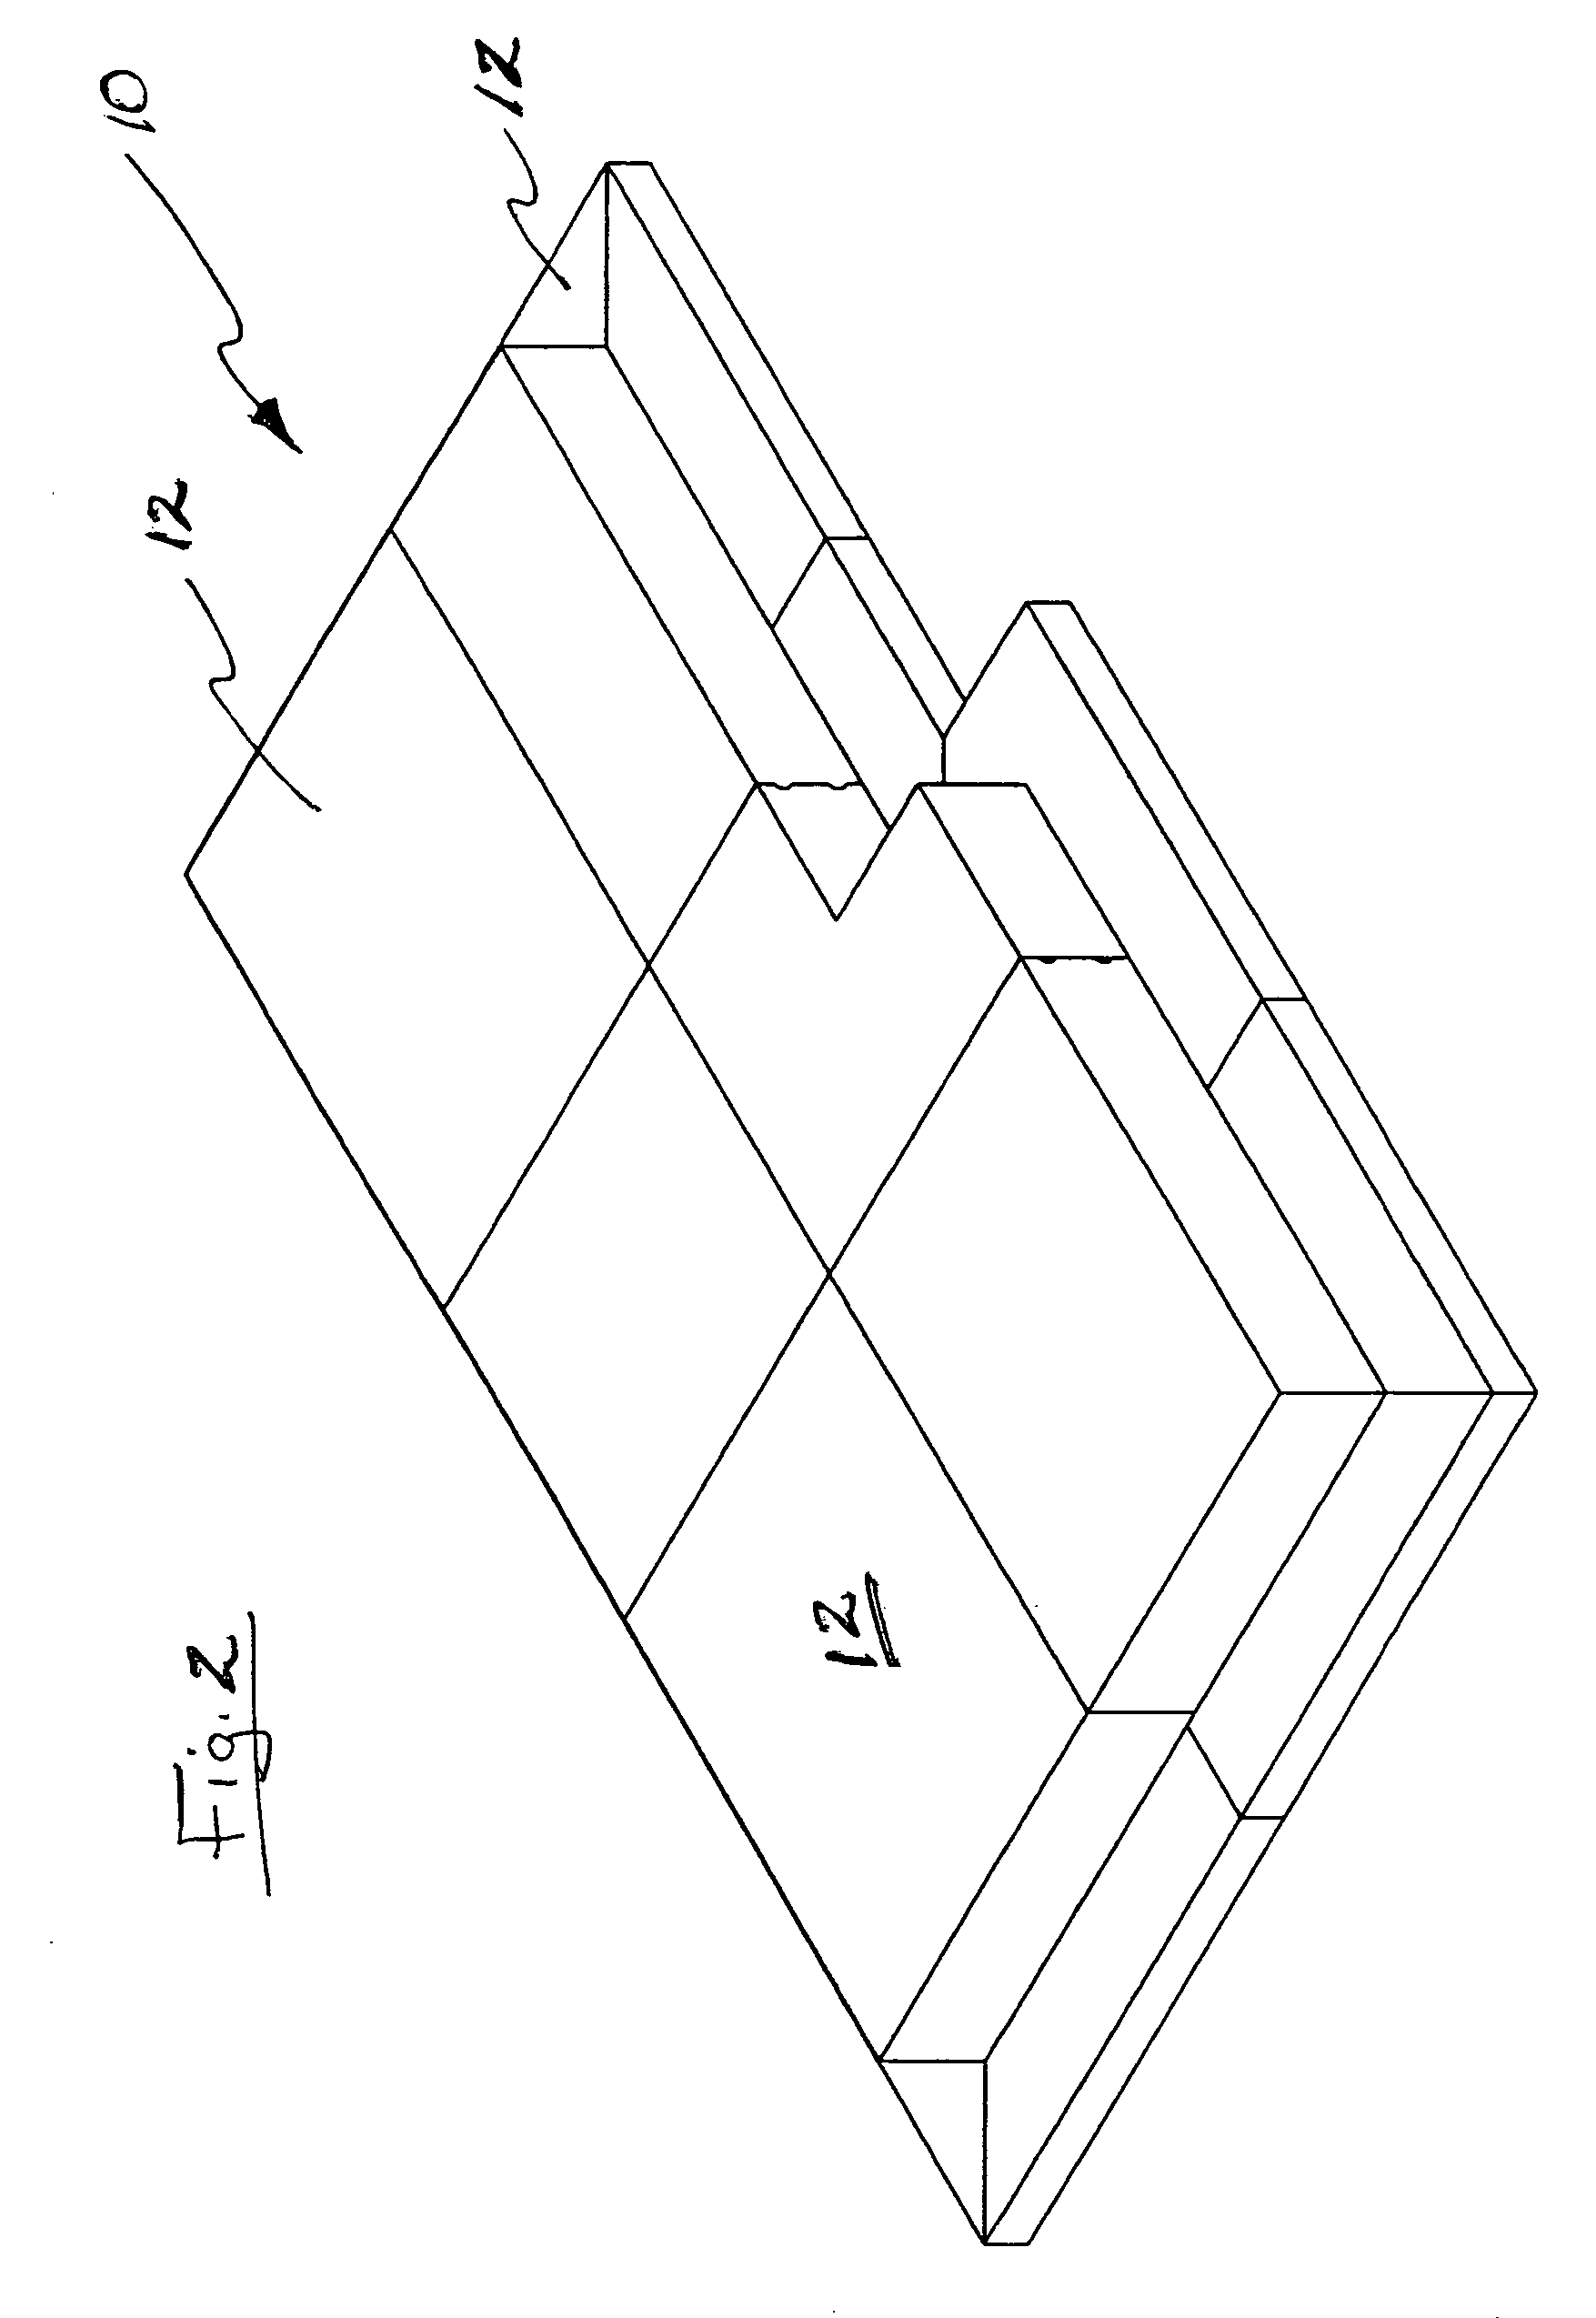 Composite box building and the method of construction